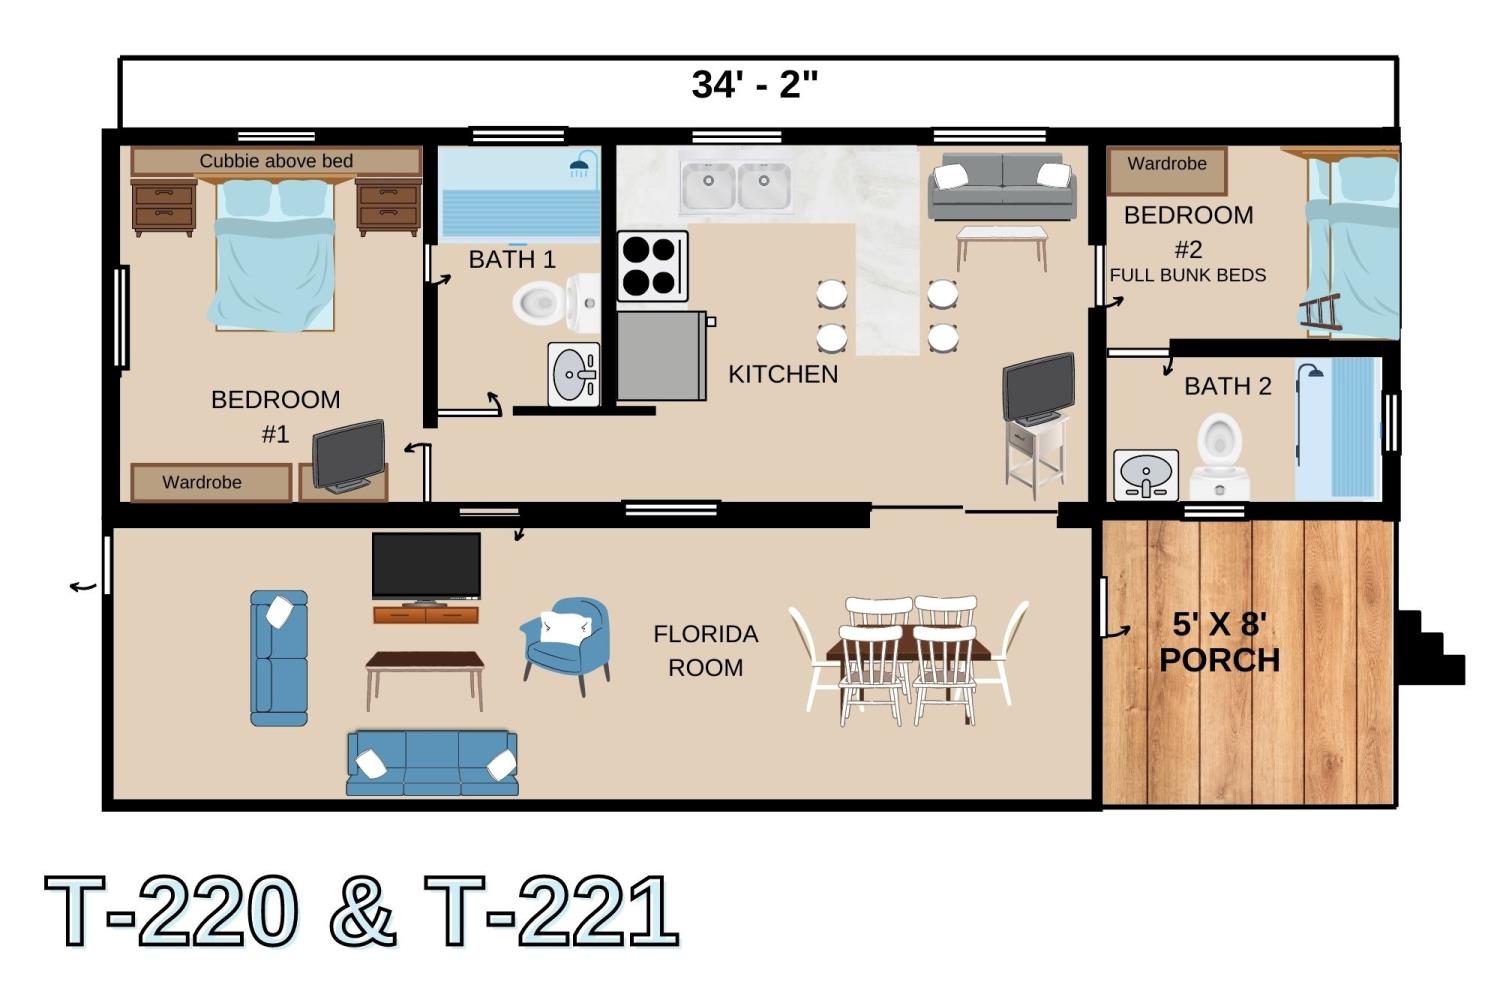 Floorplan for T220, T221 Lake Area - Weekly Rental (Saturday 2 pm to Saturday 10 am)